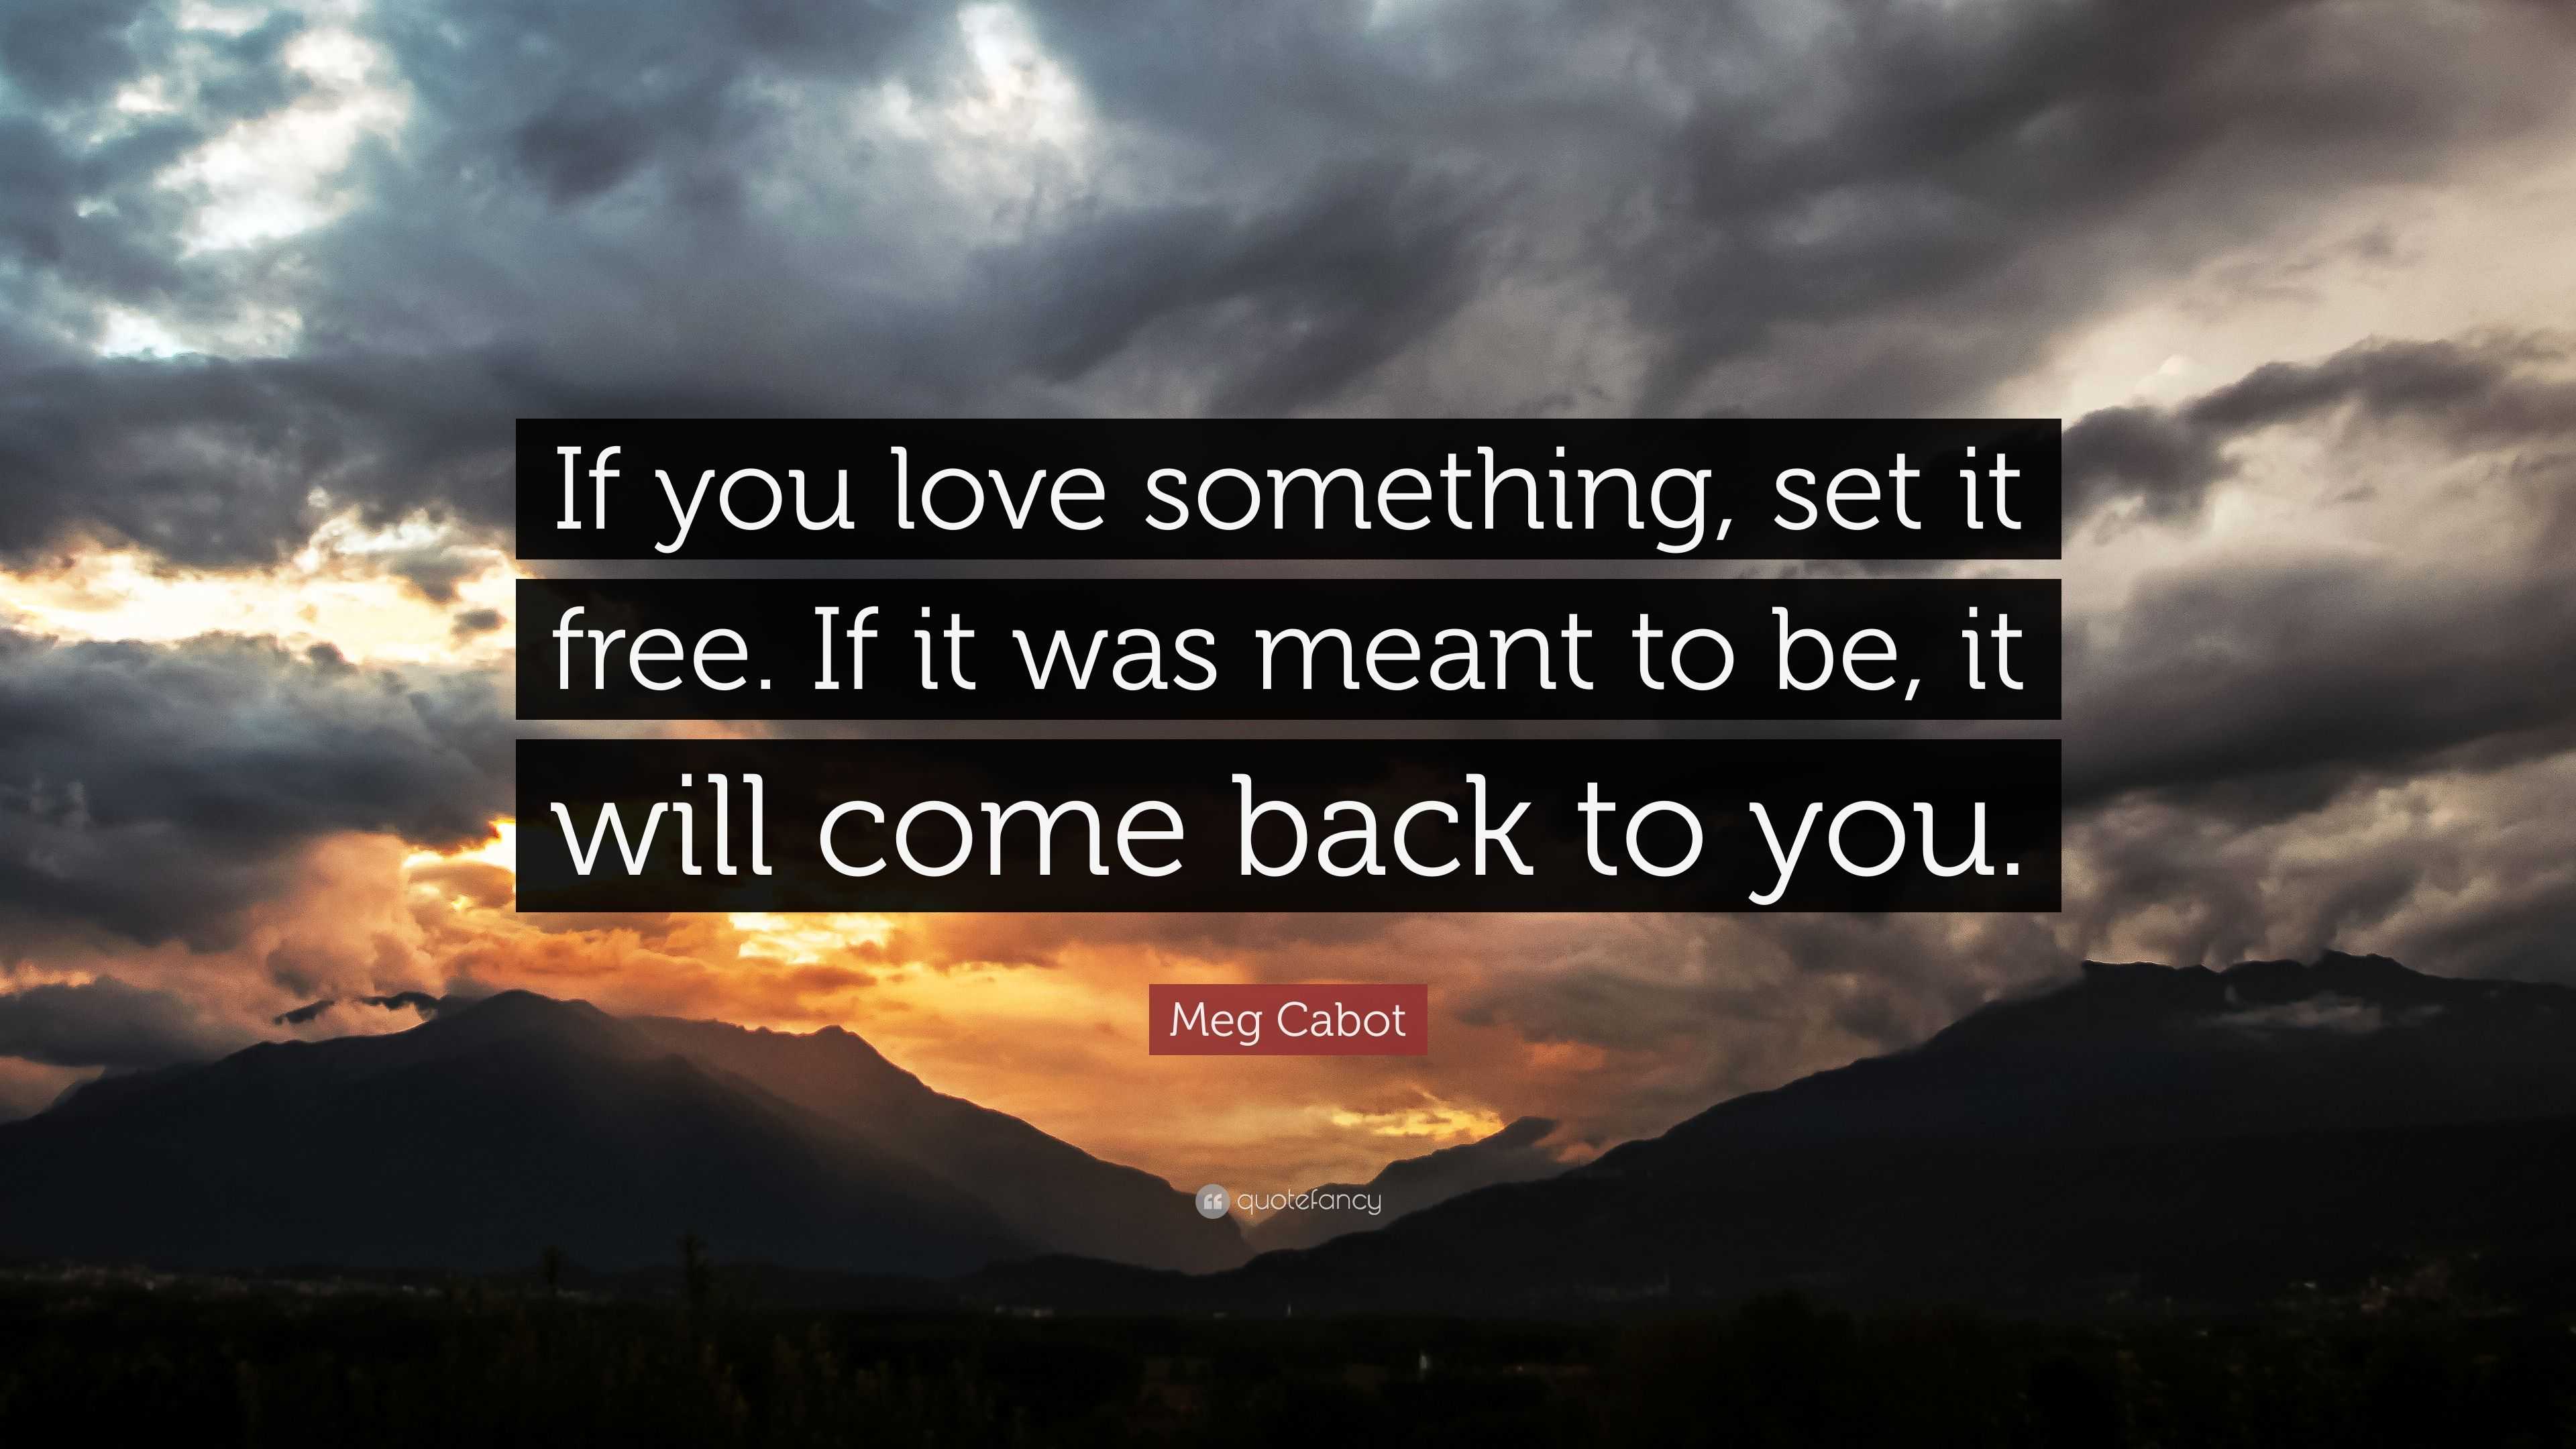 Meg Cabot Quote “if You Love Something Set It Free If It Was Meant